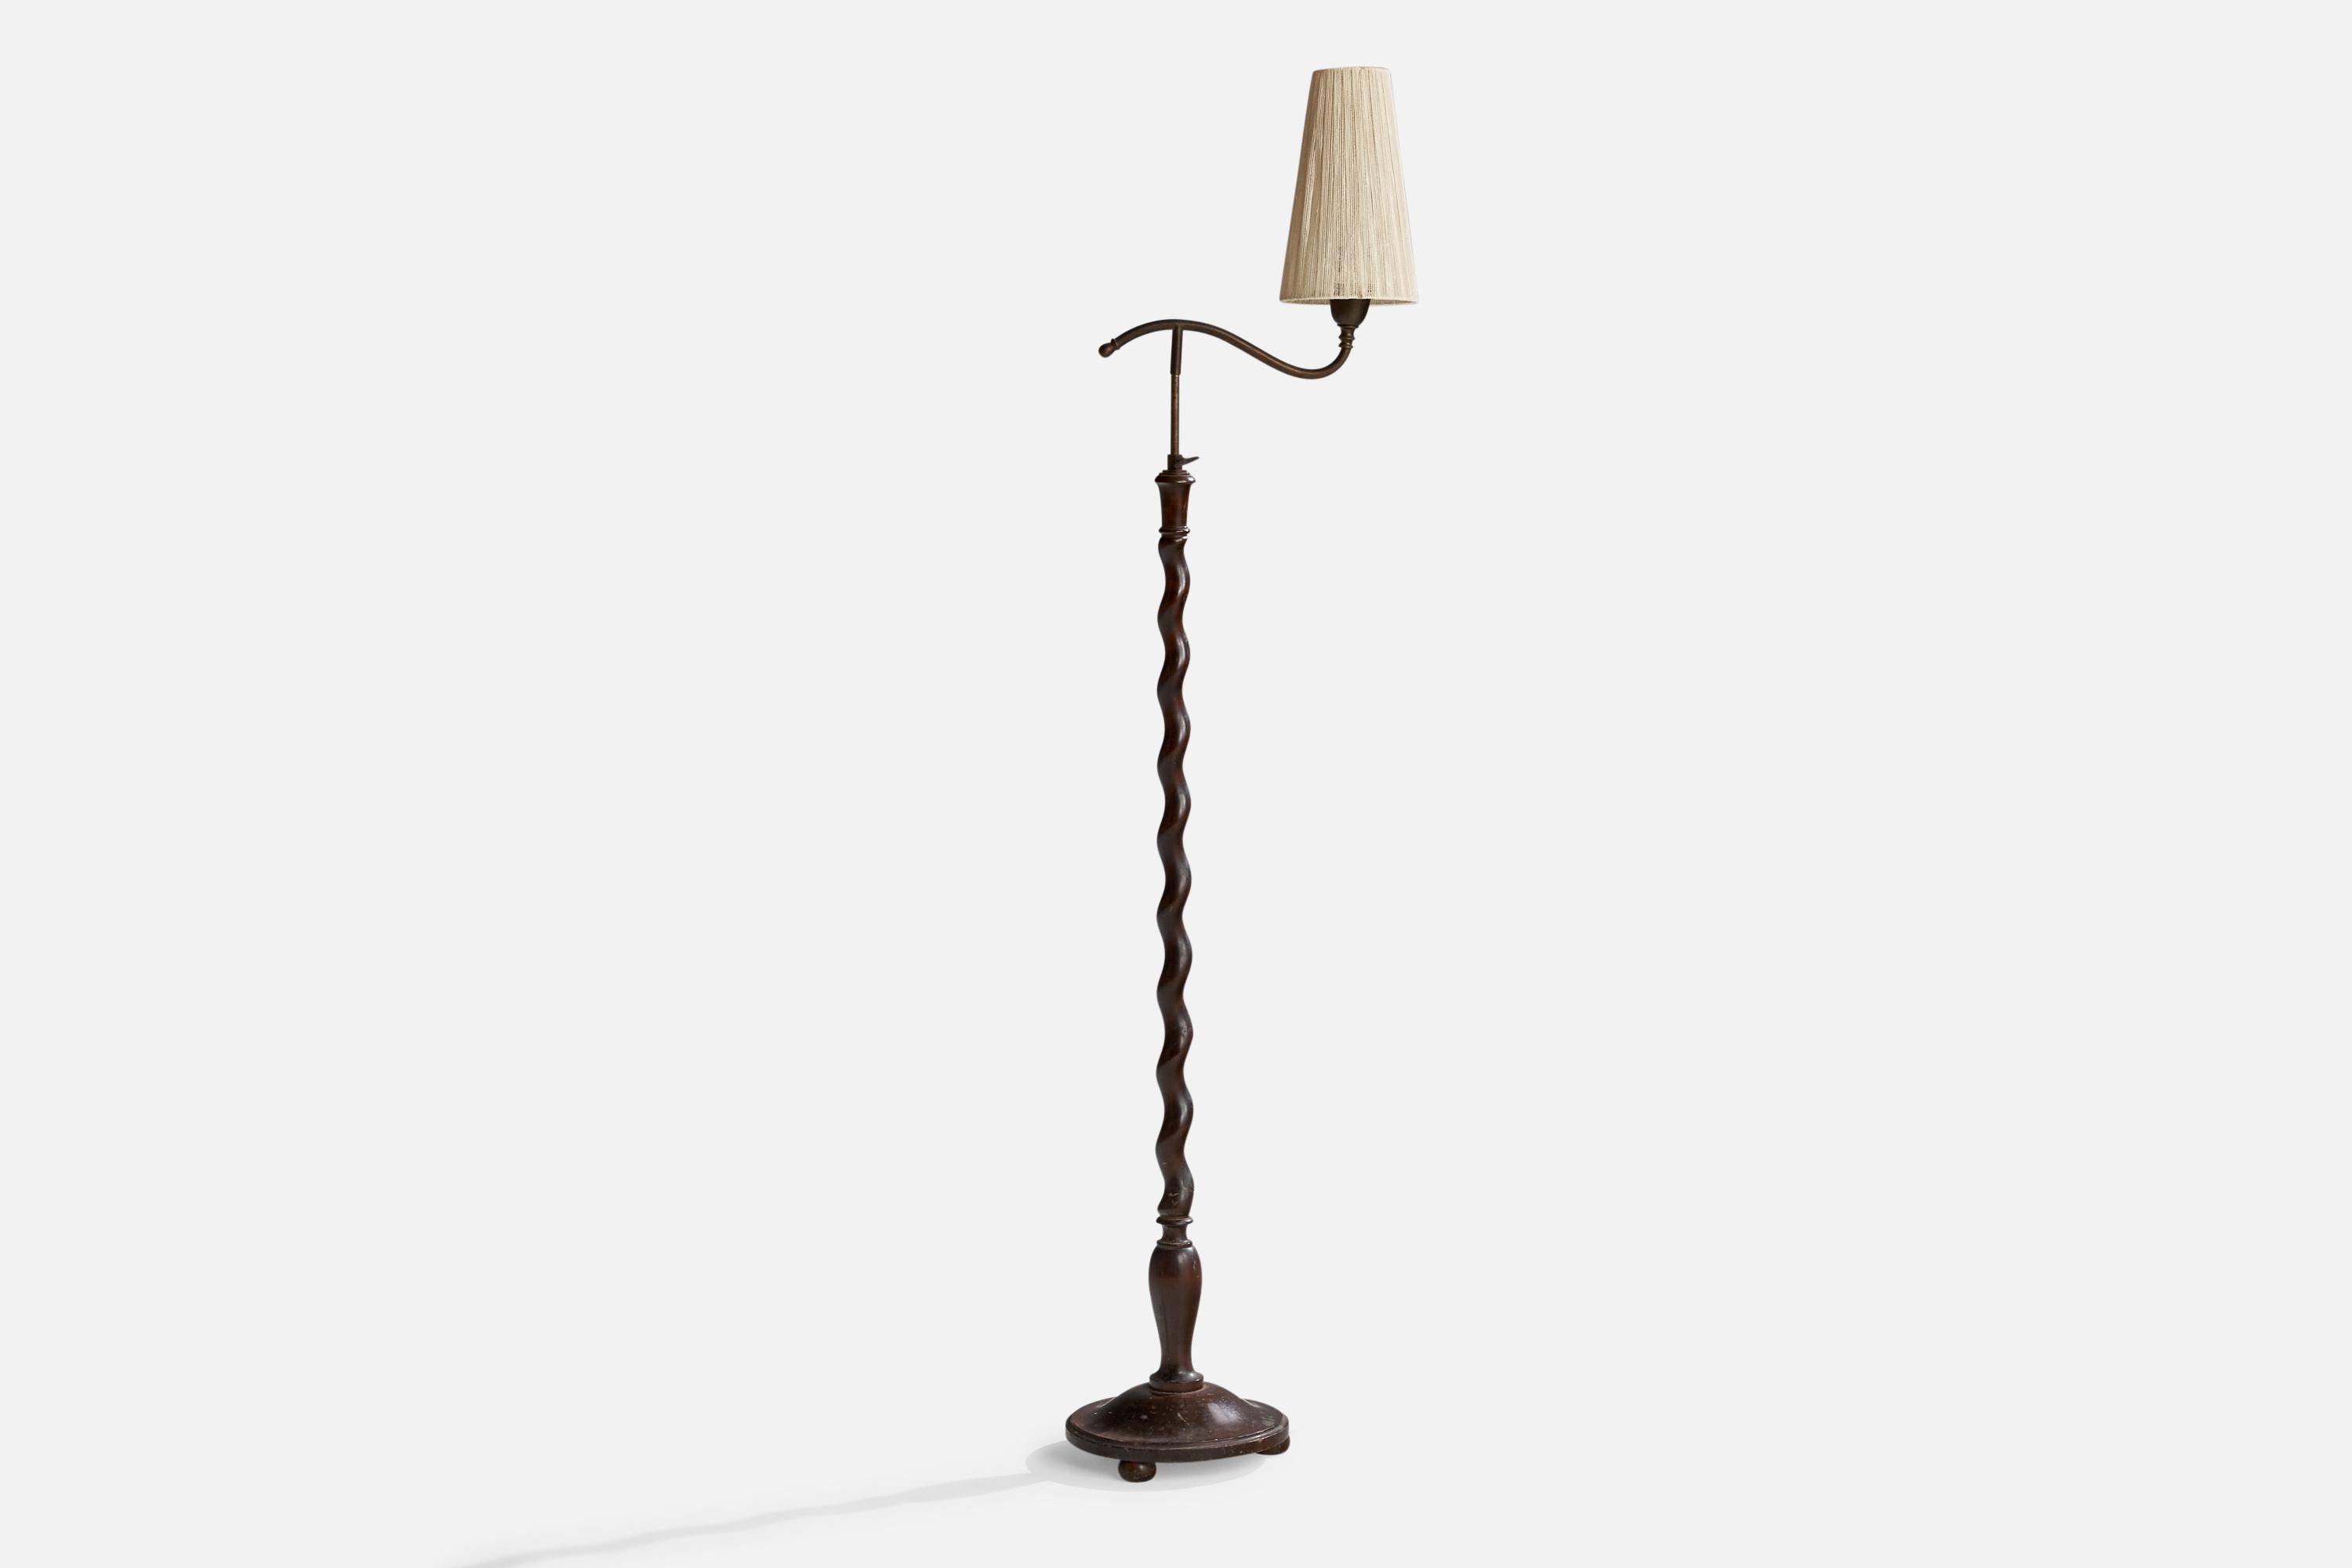 A brass, stained wood and beige string fabric floor lamp designed and produced in Sweden, 1930s.

Dimensions variable.
Overall Dimensions (inches): 59.5” H x 10” W x 16” D
Stated dimensions include shade.
Bulb Specifications: E-26 Bulb
Number of